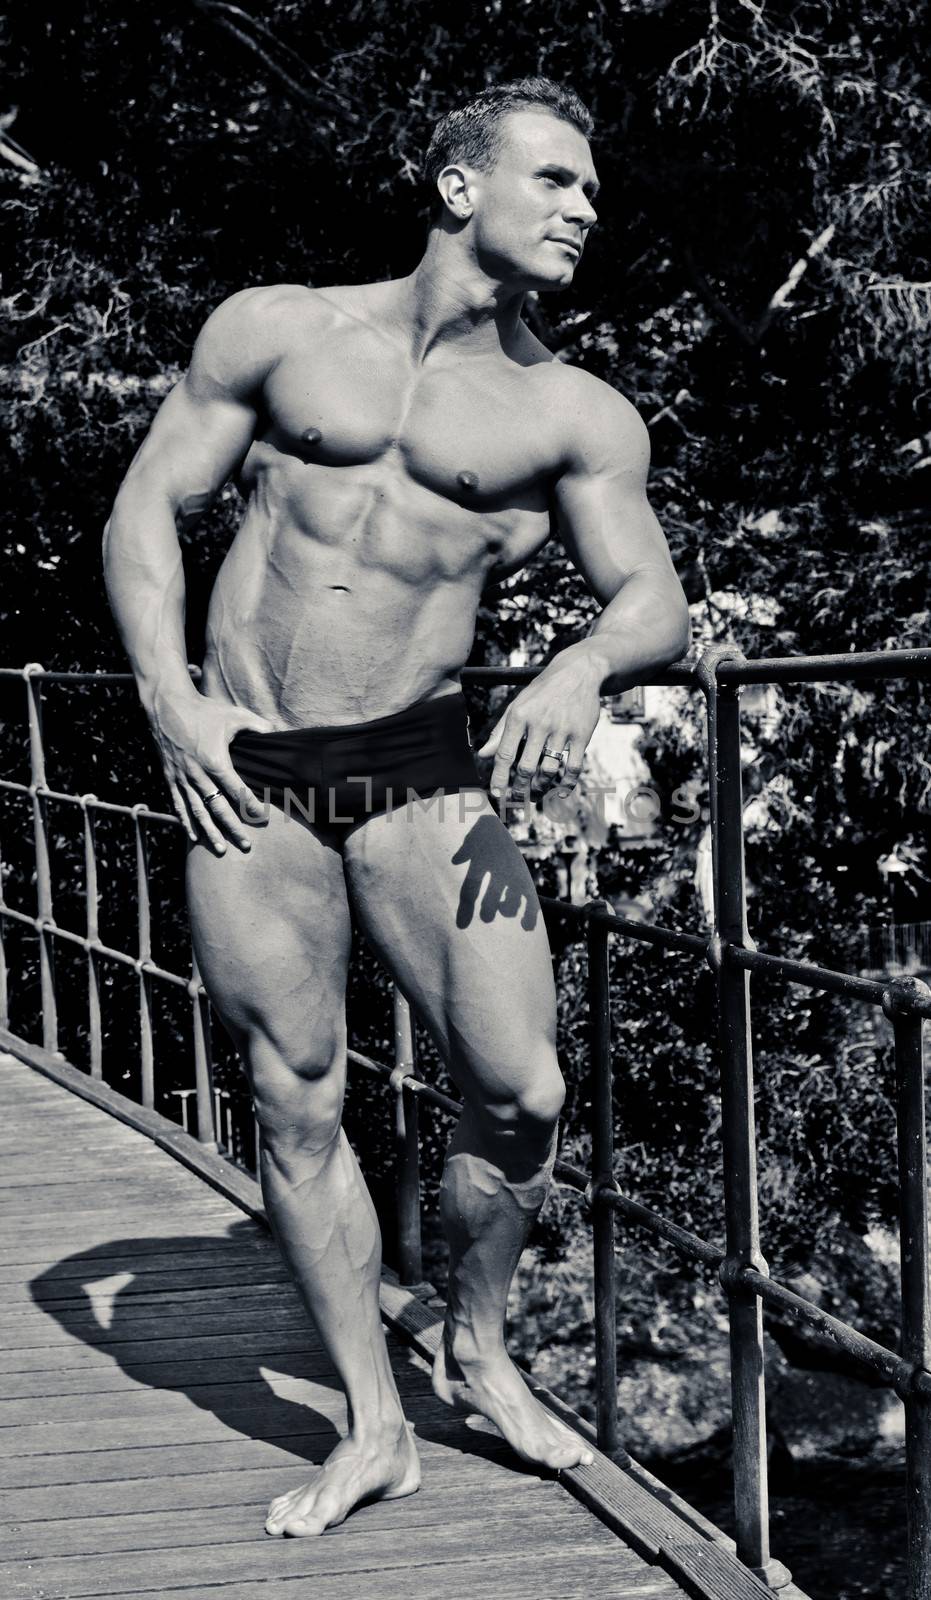 Handsome young muscle man smiling, outdoors, showing muscular body, black and white